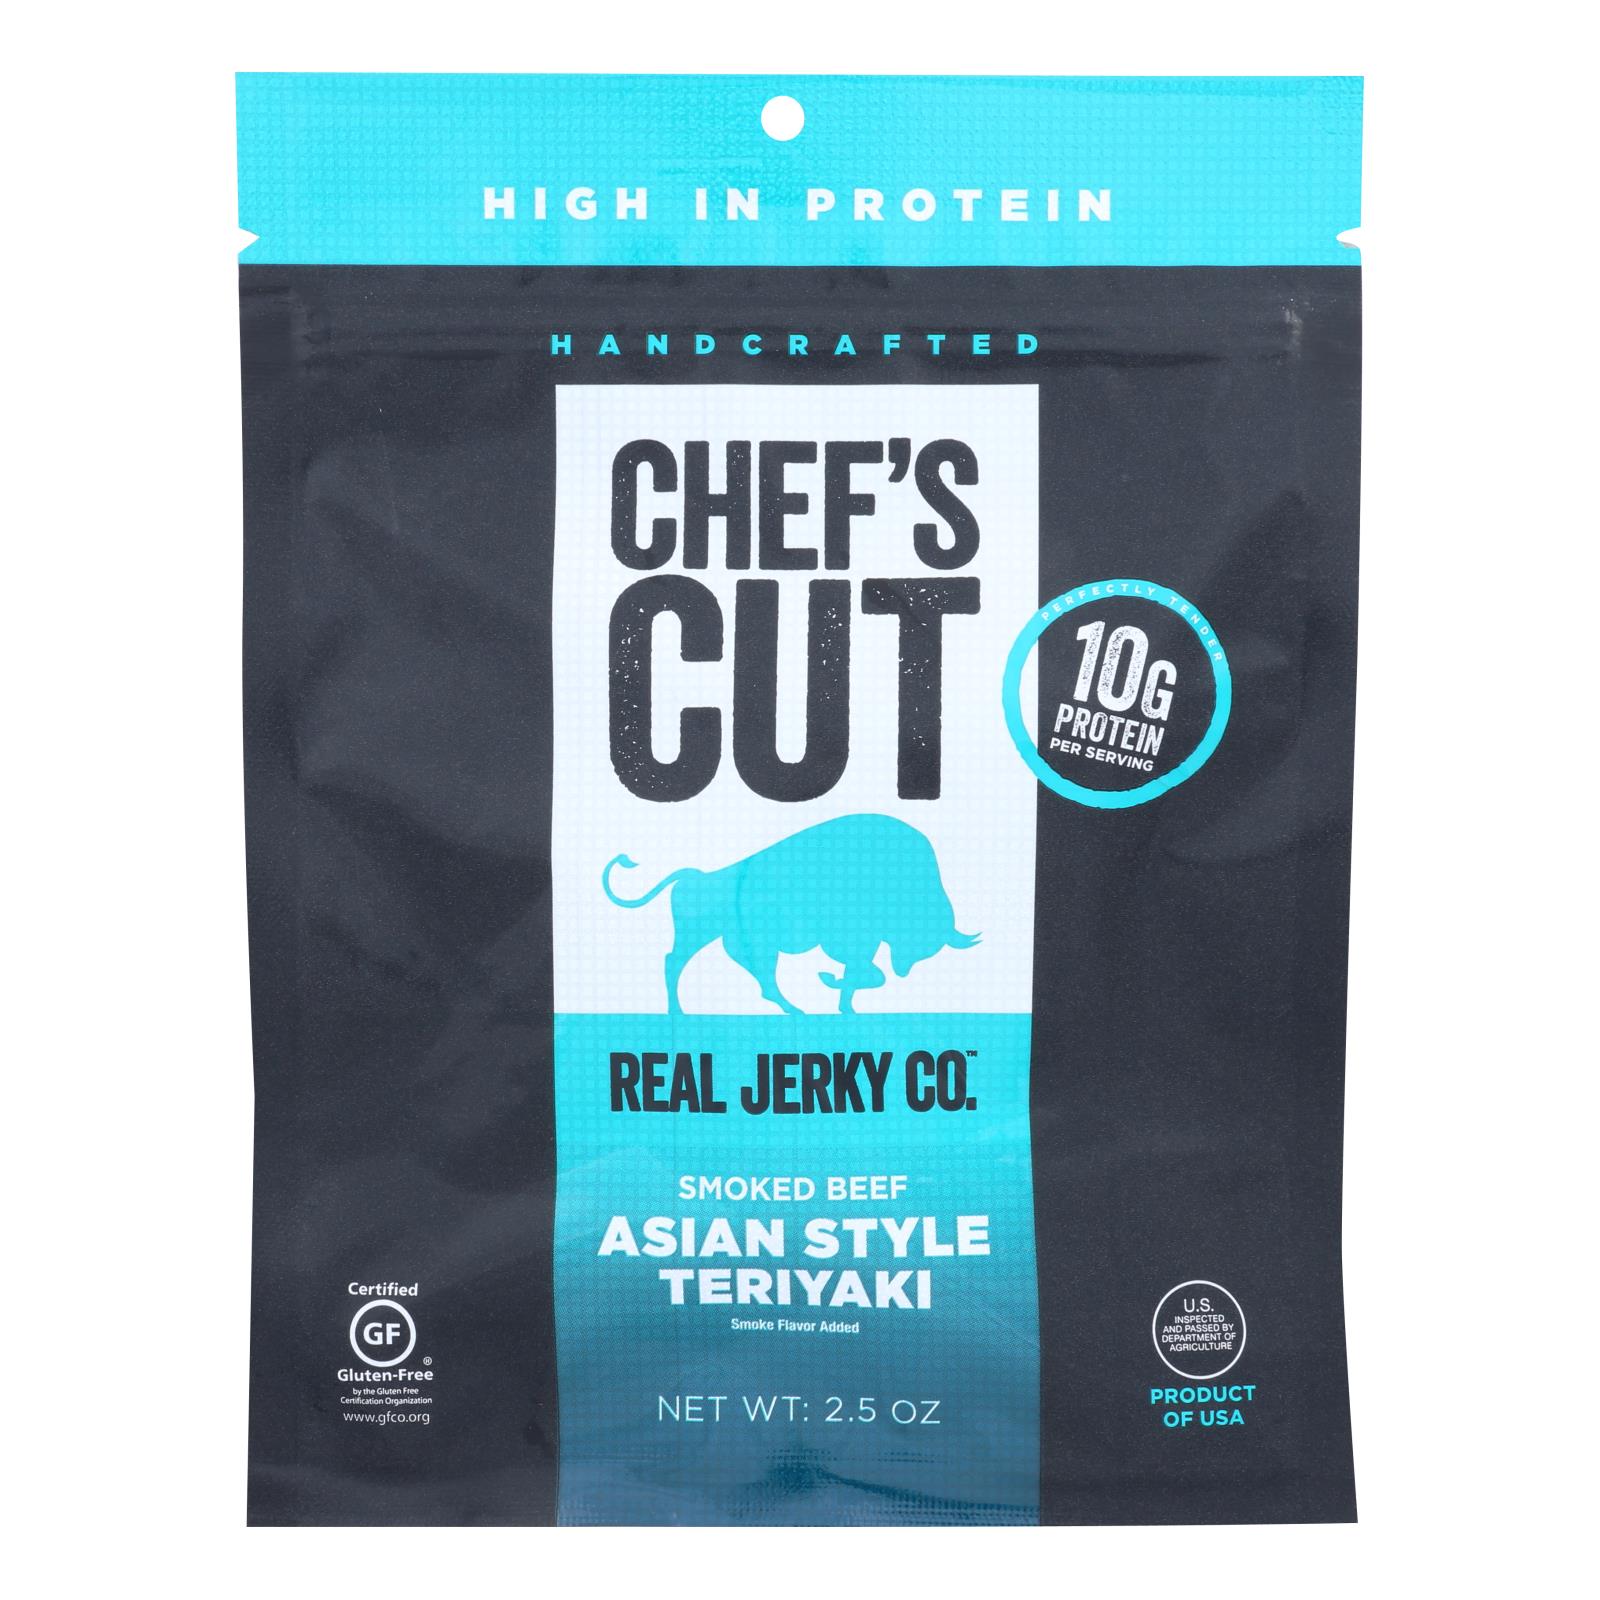 Chef's Cut Real Jerky Co. Handcrafted Teriyaki Flavor Smoked Beef Jerky - 8개 묶음상품 - 2.5 OZ